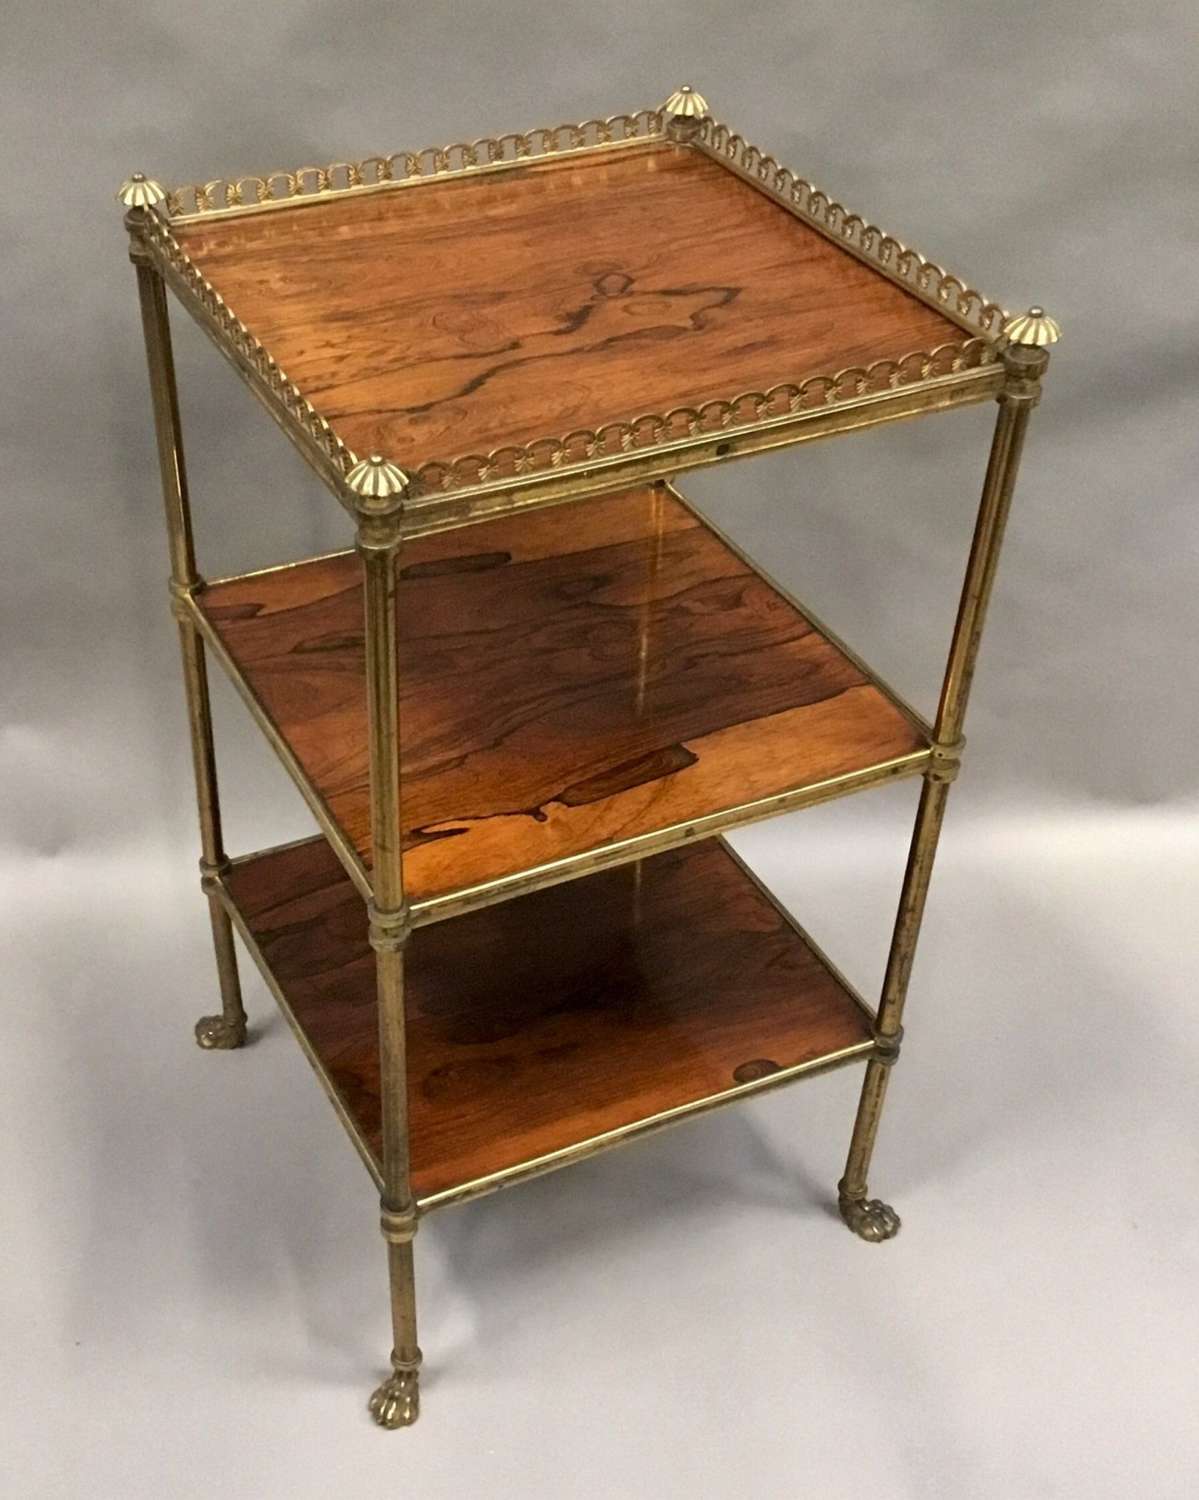 Exceptional Regency rosewood and gilt brass etagere / whatnot